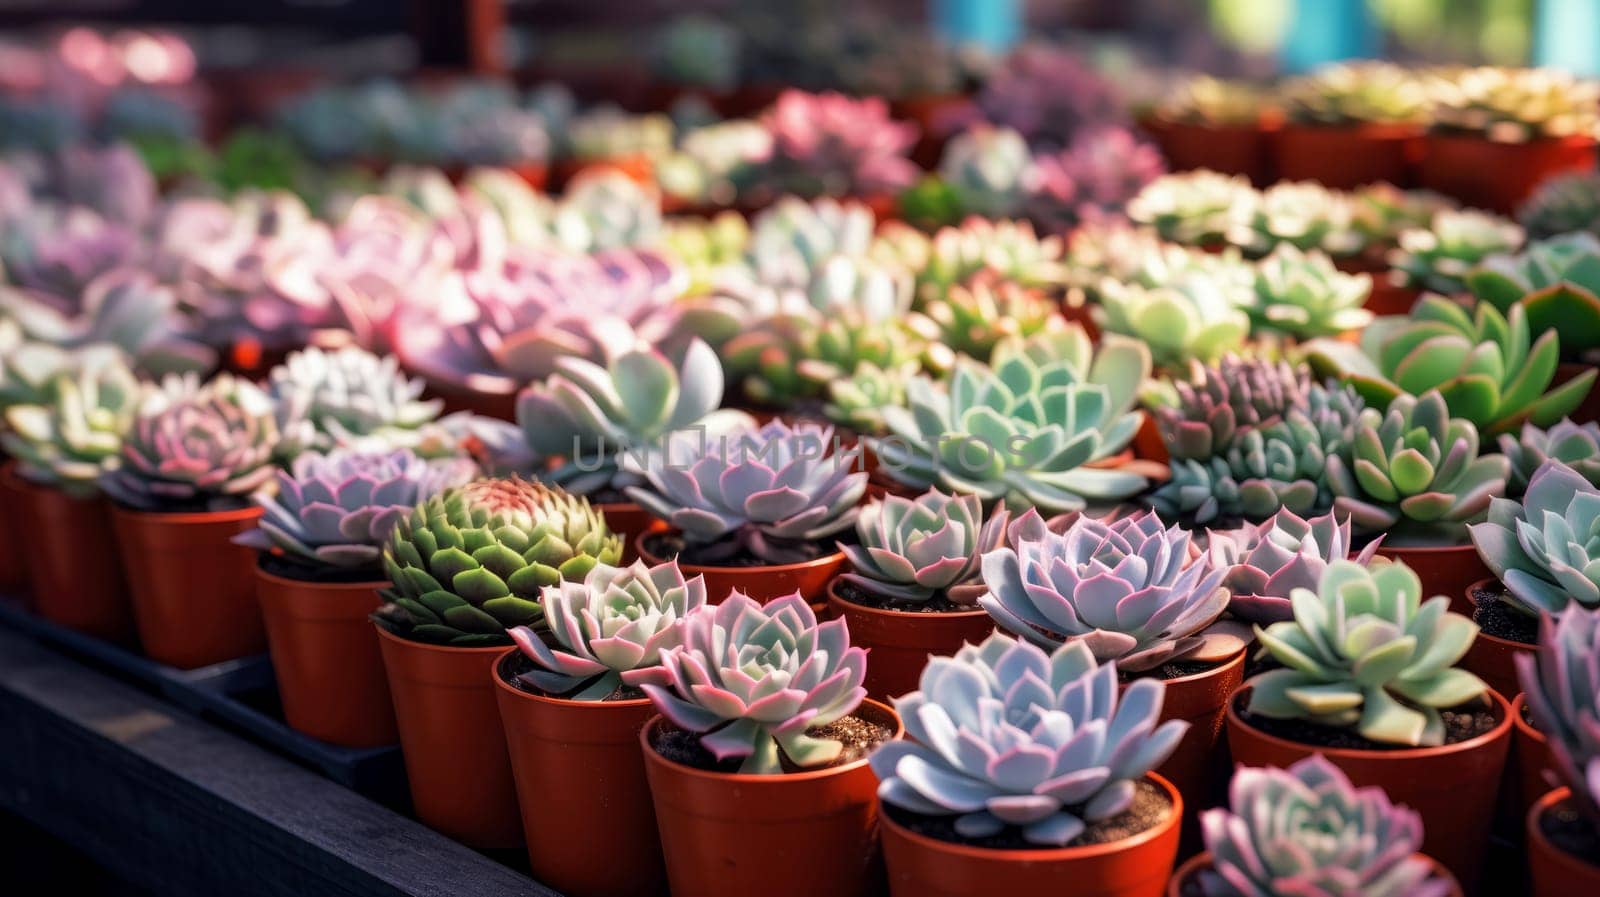 succulents in a greenhouse in clay pots are arranged in rows on a wooden surface. by Ramanouskaya